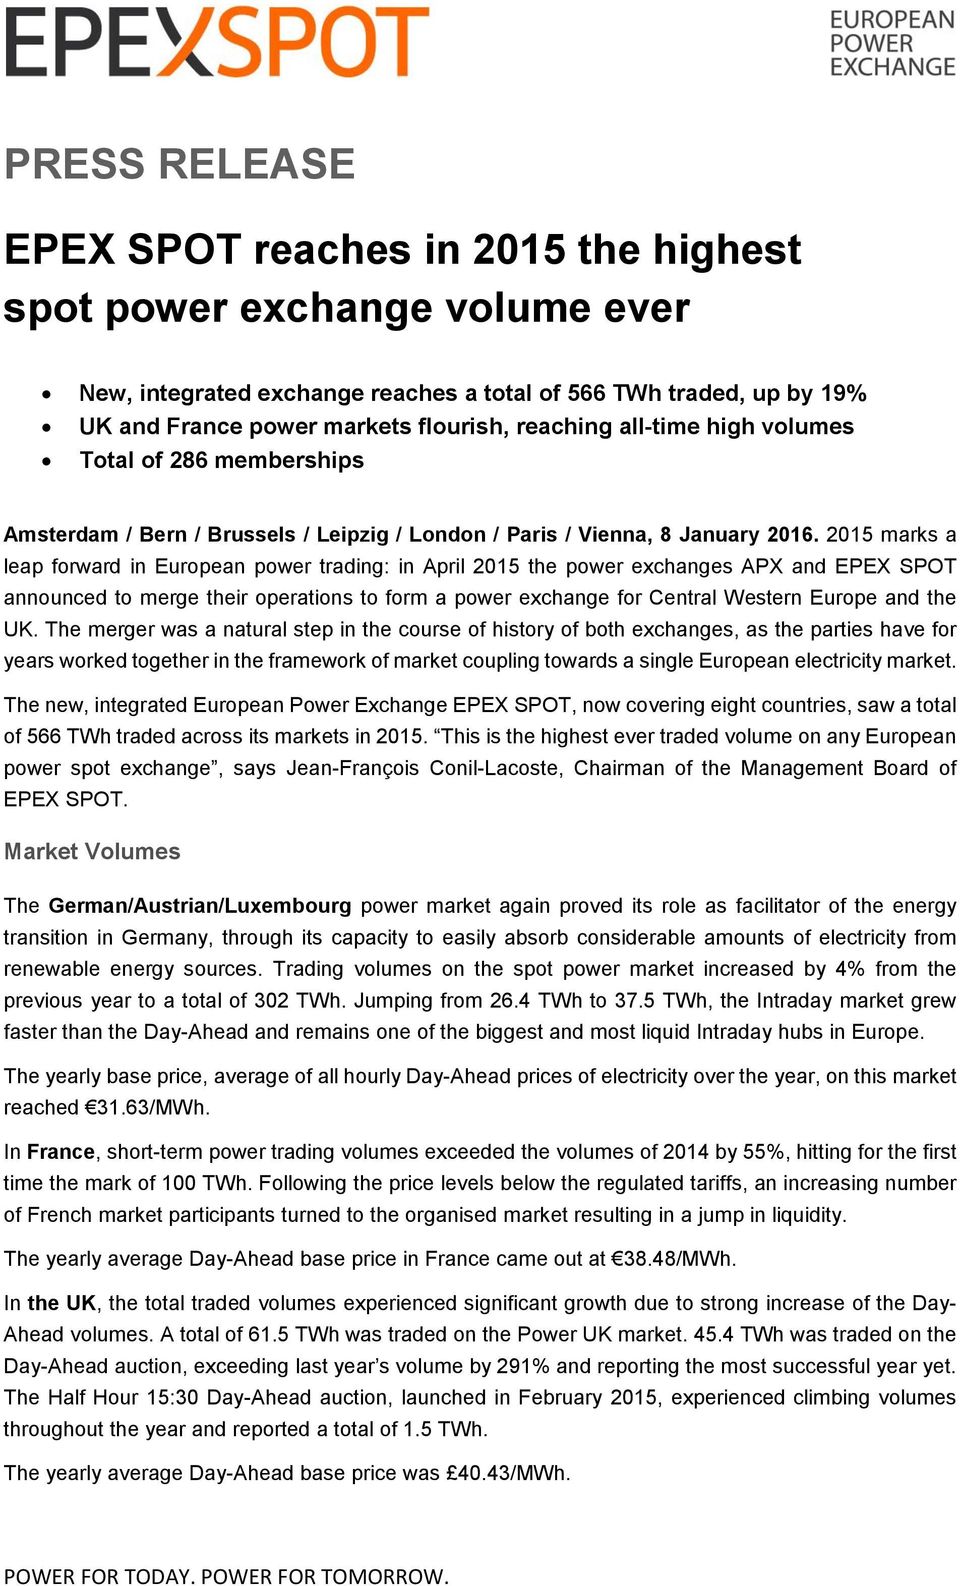 2015 marks a leap forward in European power trading: in April 2015 the power exchanges APX and EPEX SPOT announced to merge their operations to form a power exchange for Central Western Europe and